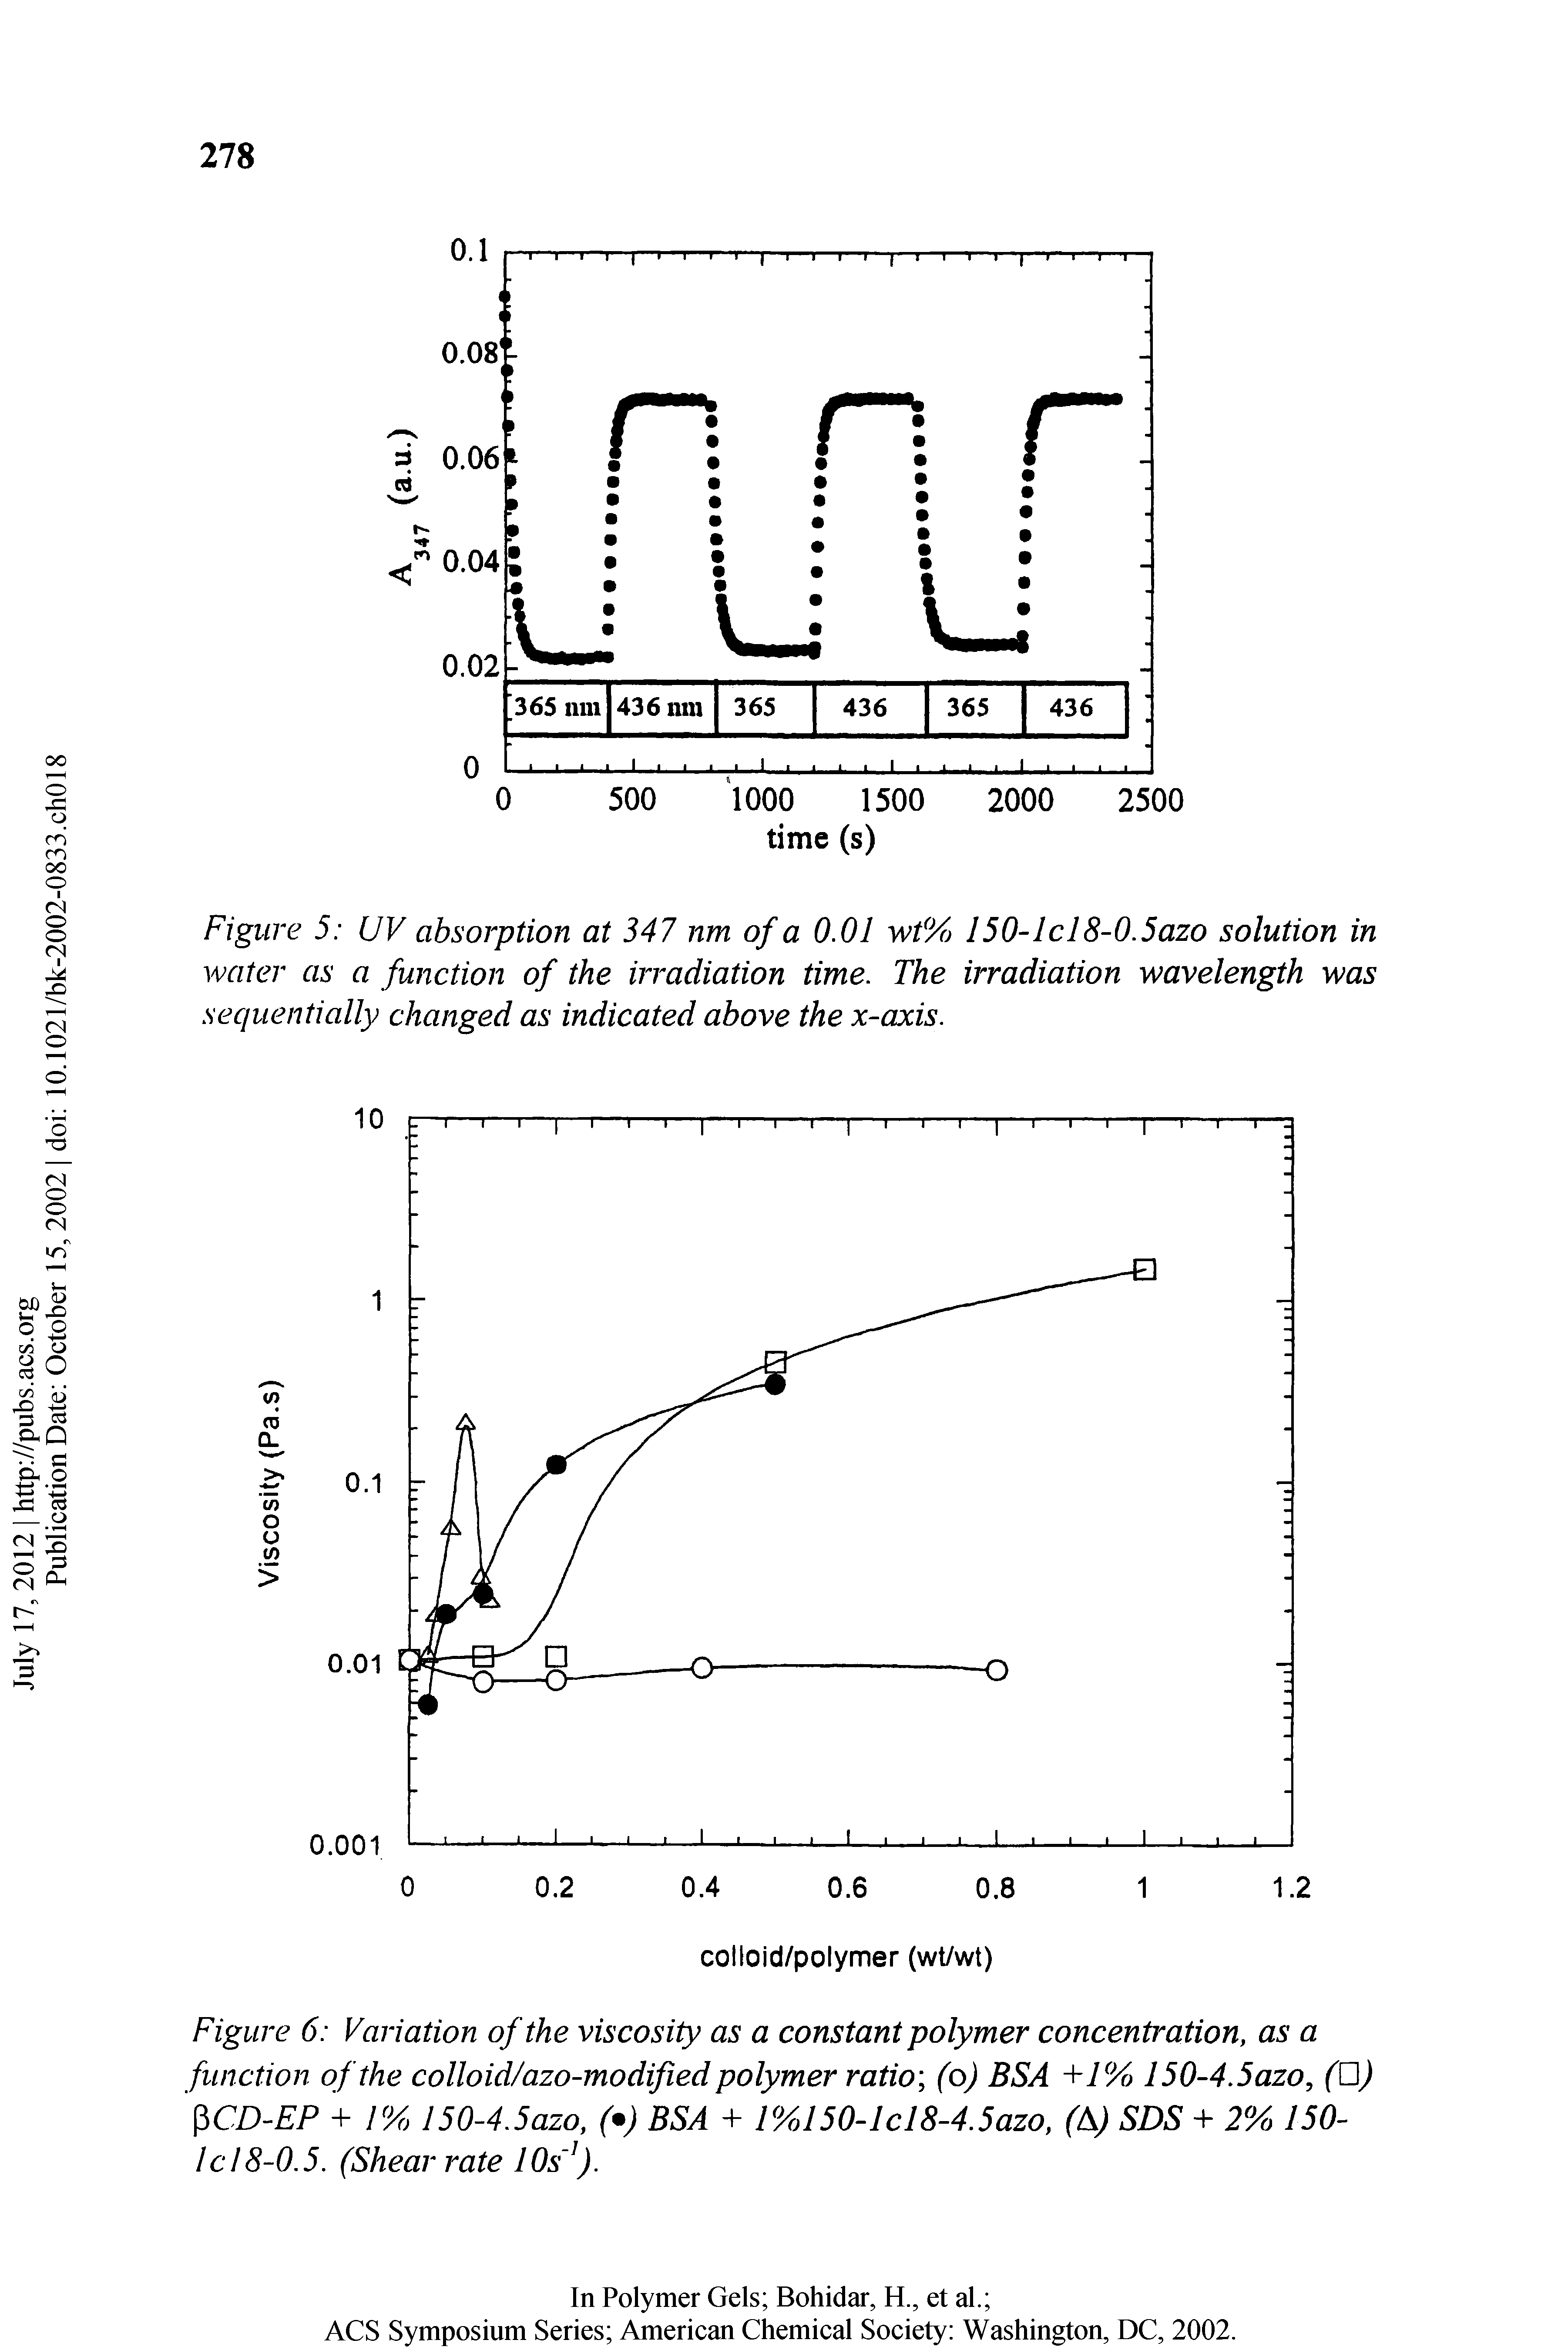 Figure 6 Variation of the viscosity as a constant polymer concentration, as a function of the colloid/azo-modified polymer ratio (o) BSA +7% 150-4.5azo, (U) CD-EP + 1% 150-4.5azo, ( ) BSA + I%l50-lcl8-4.5azo, (A) SDS + 2% 150-lcl8-0.5. (Shear rate lOs f.